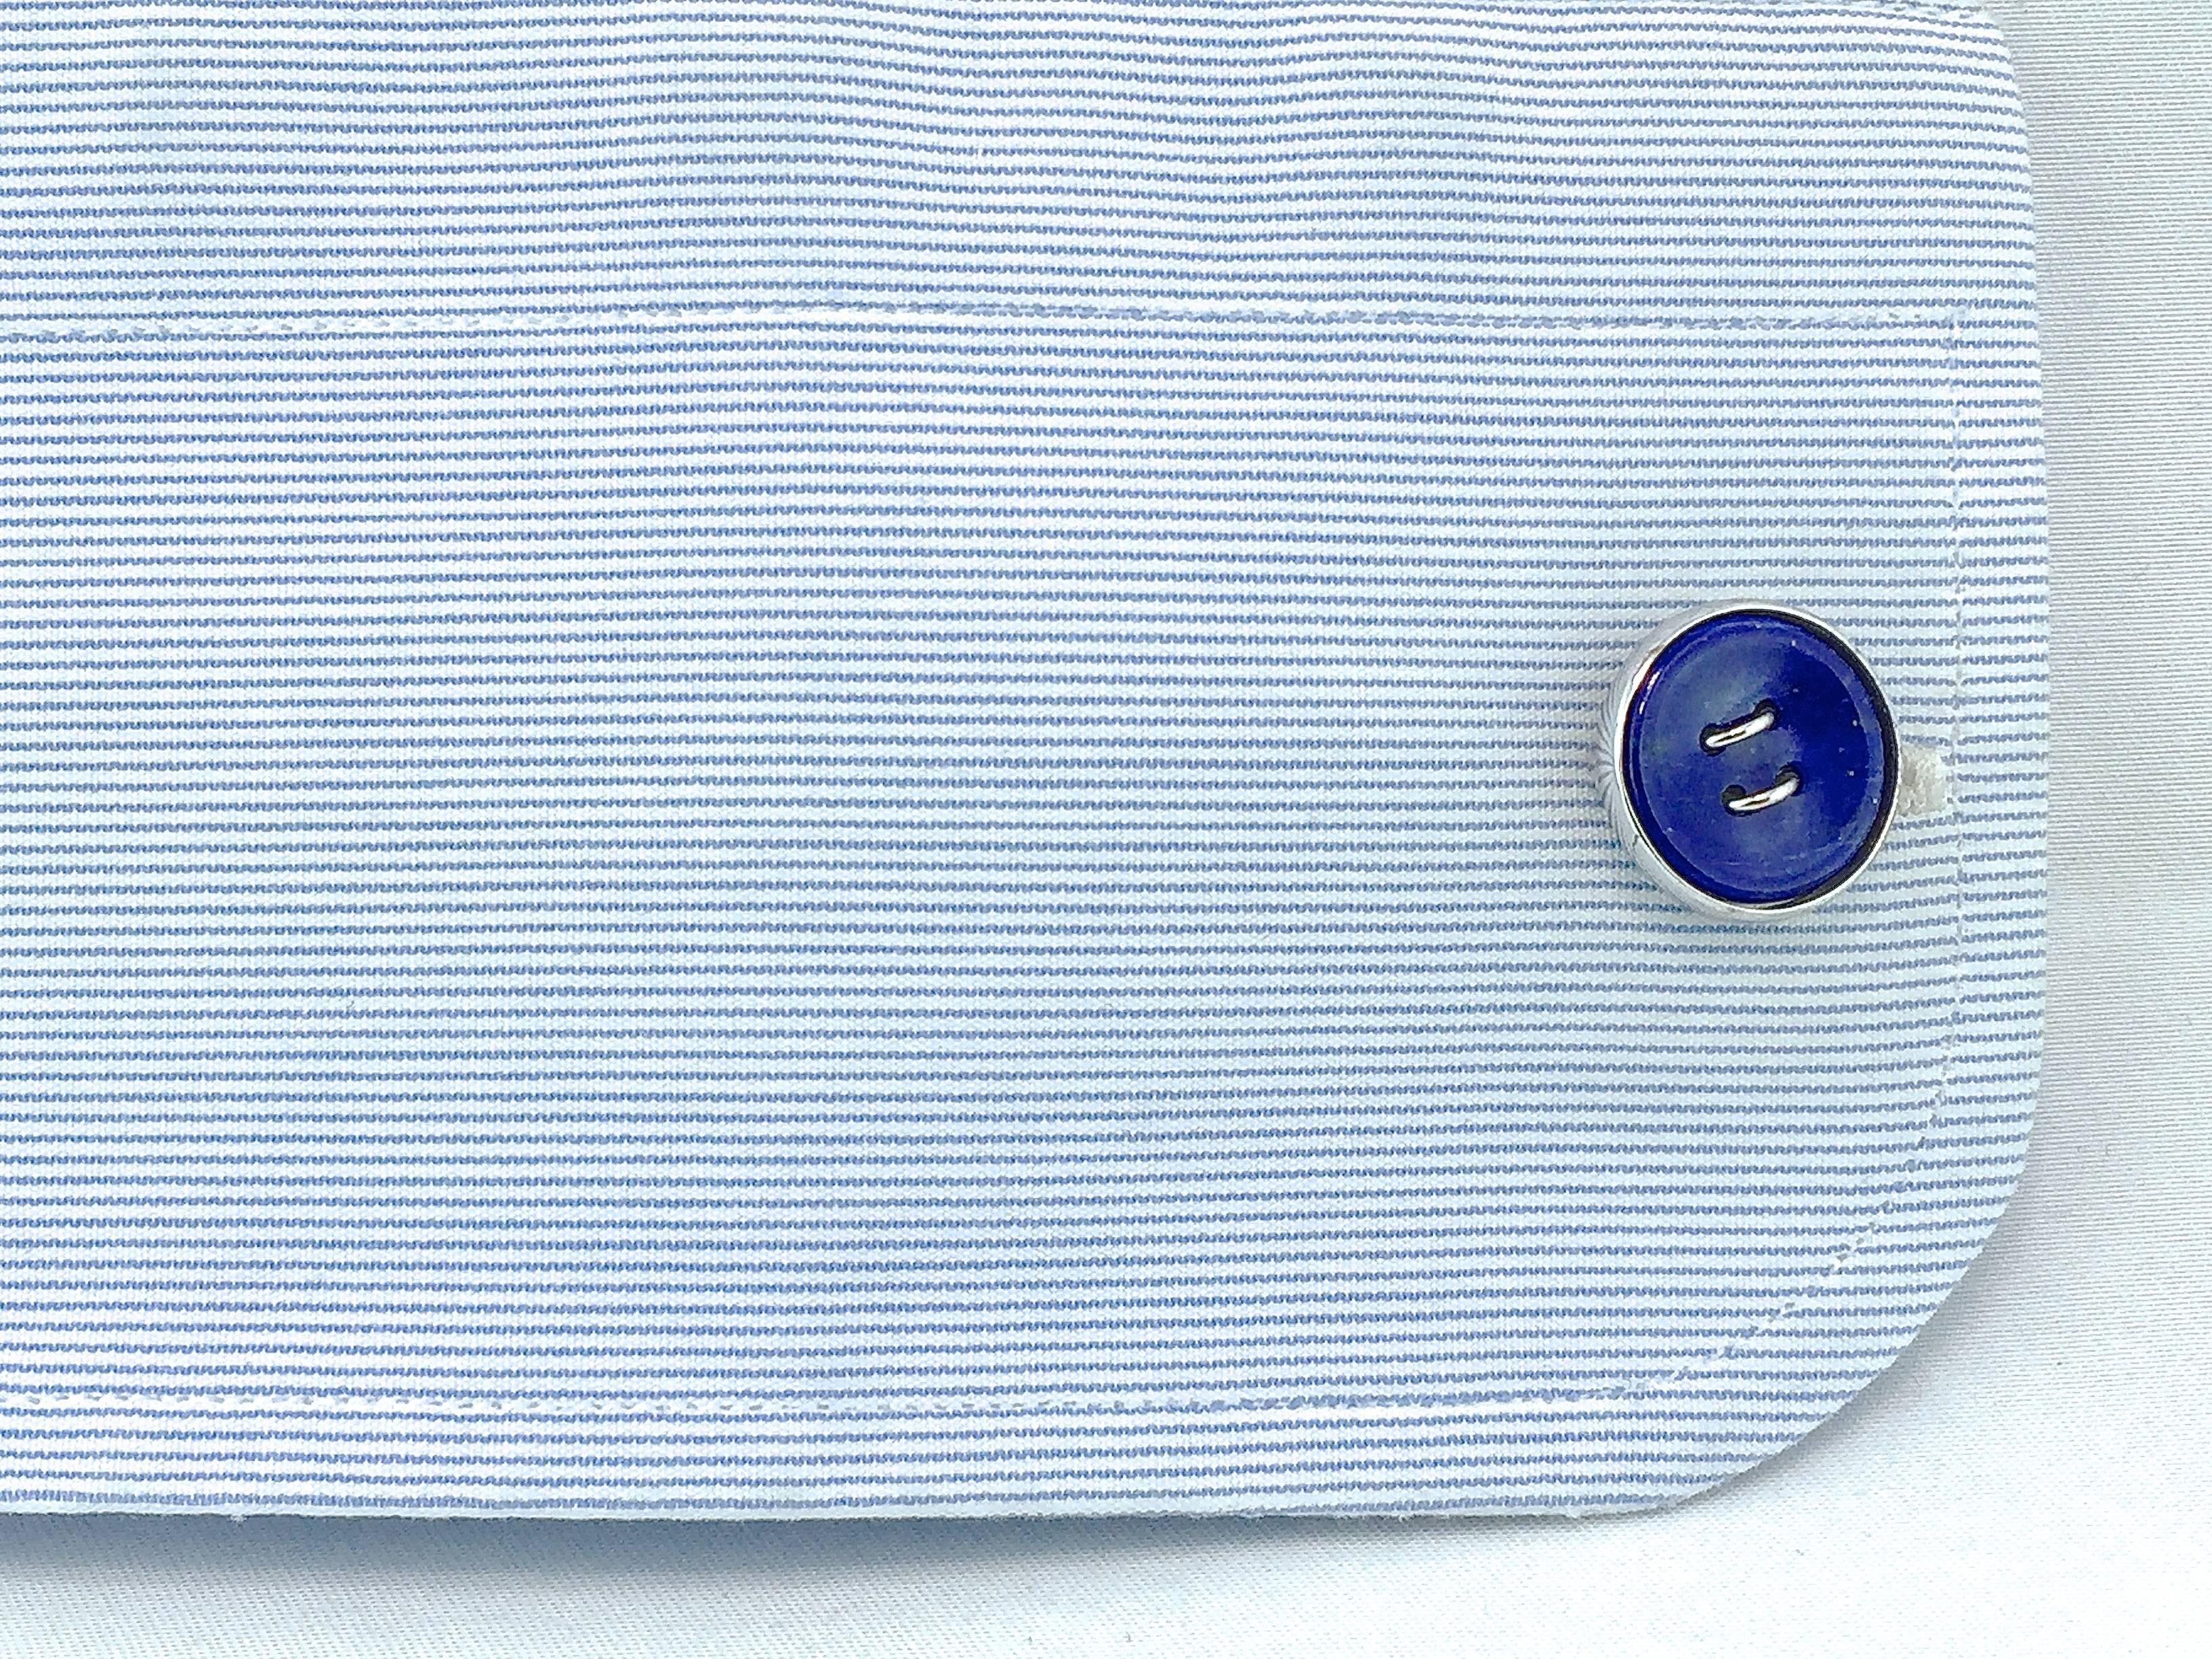 Jona design collection, hand crafted in Italy, lapis lazuli sterling silver button cufflinks.
Bigger button diameter: 0.61